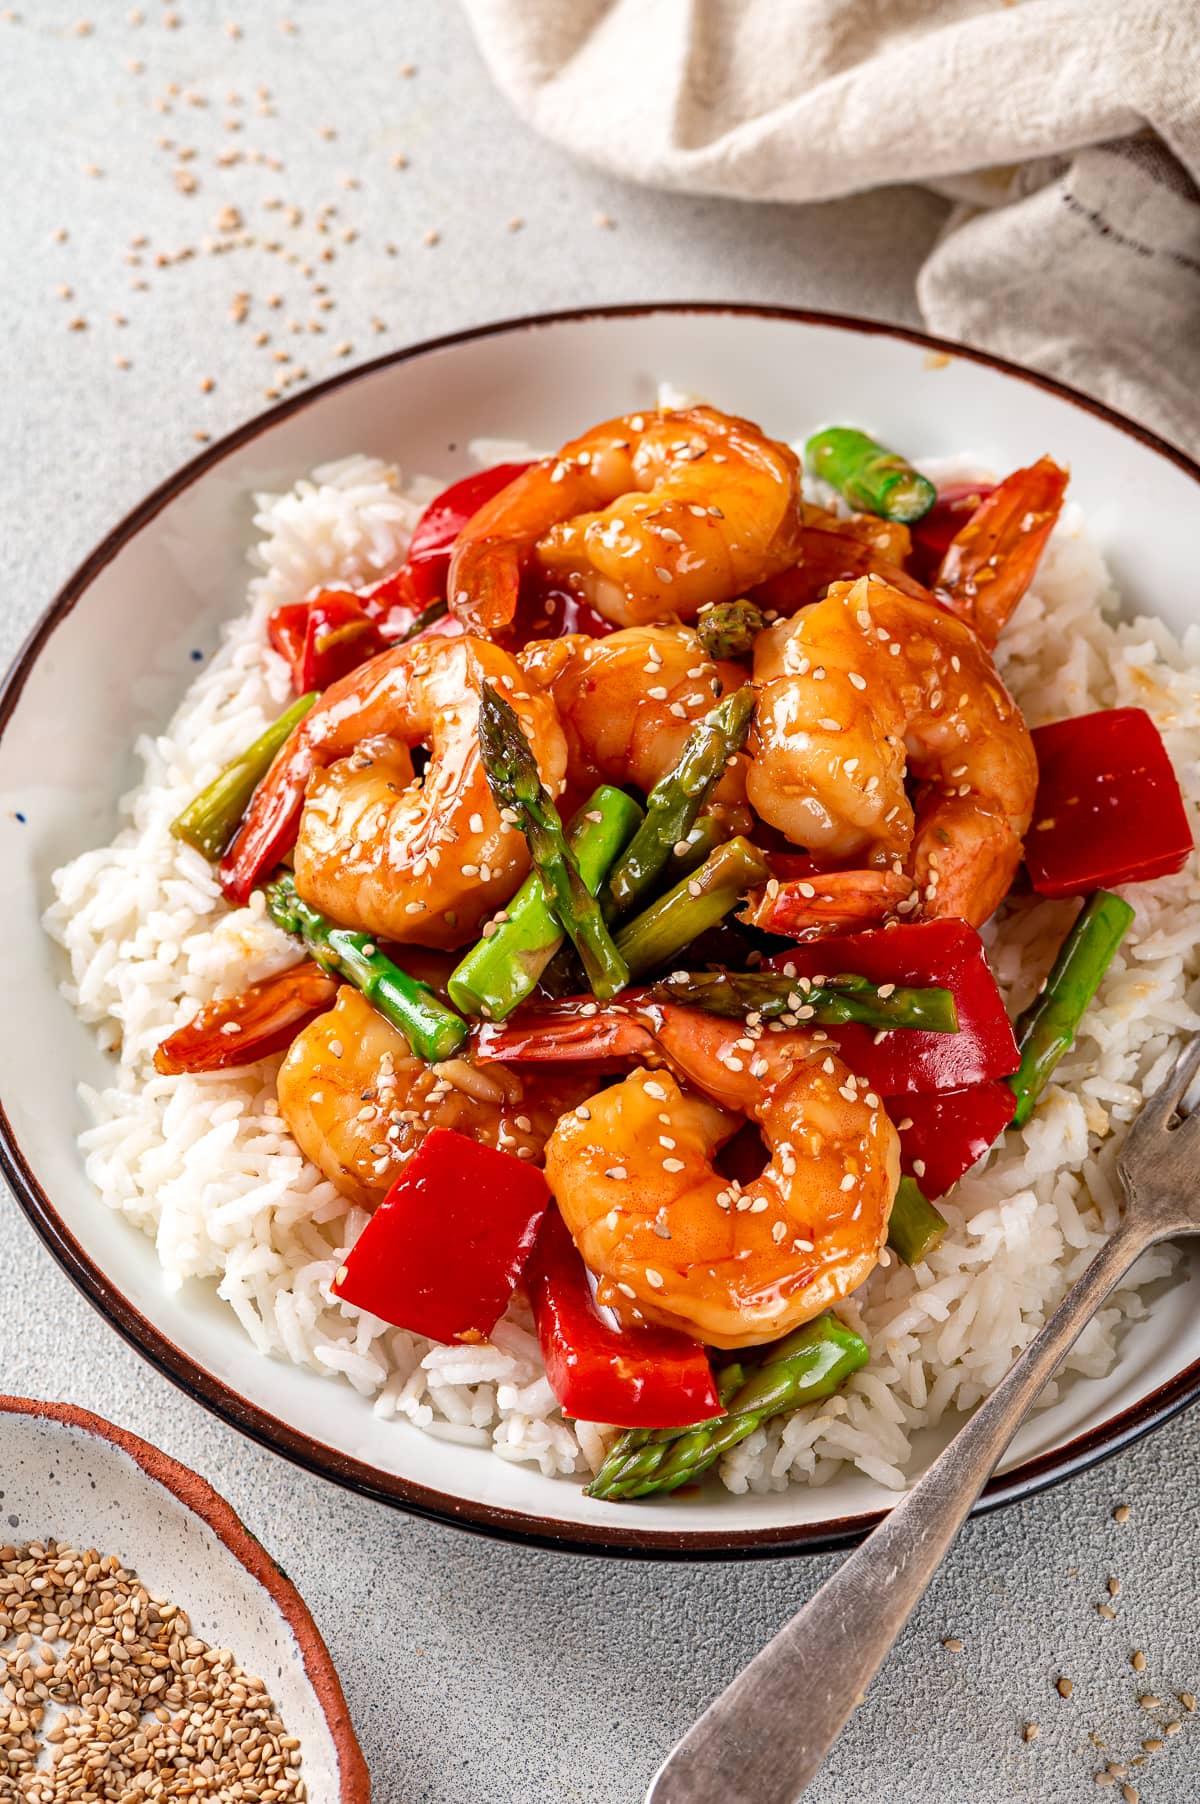 Shrimp and vegetables in a bowl over rice.